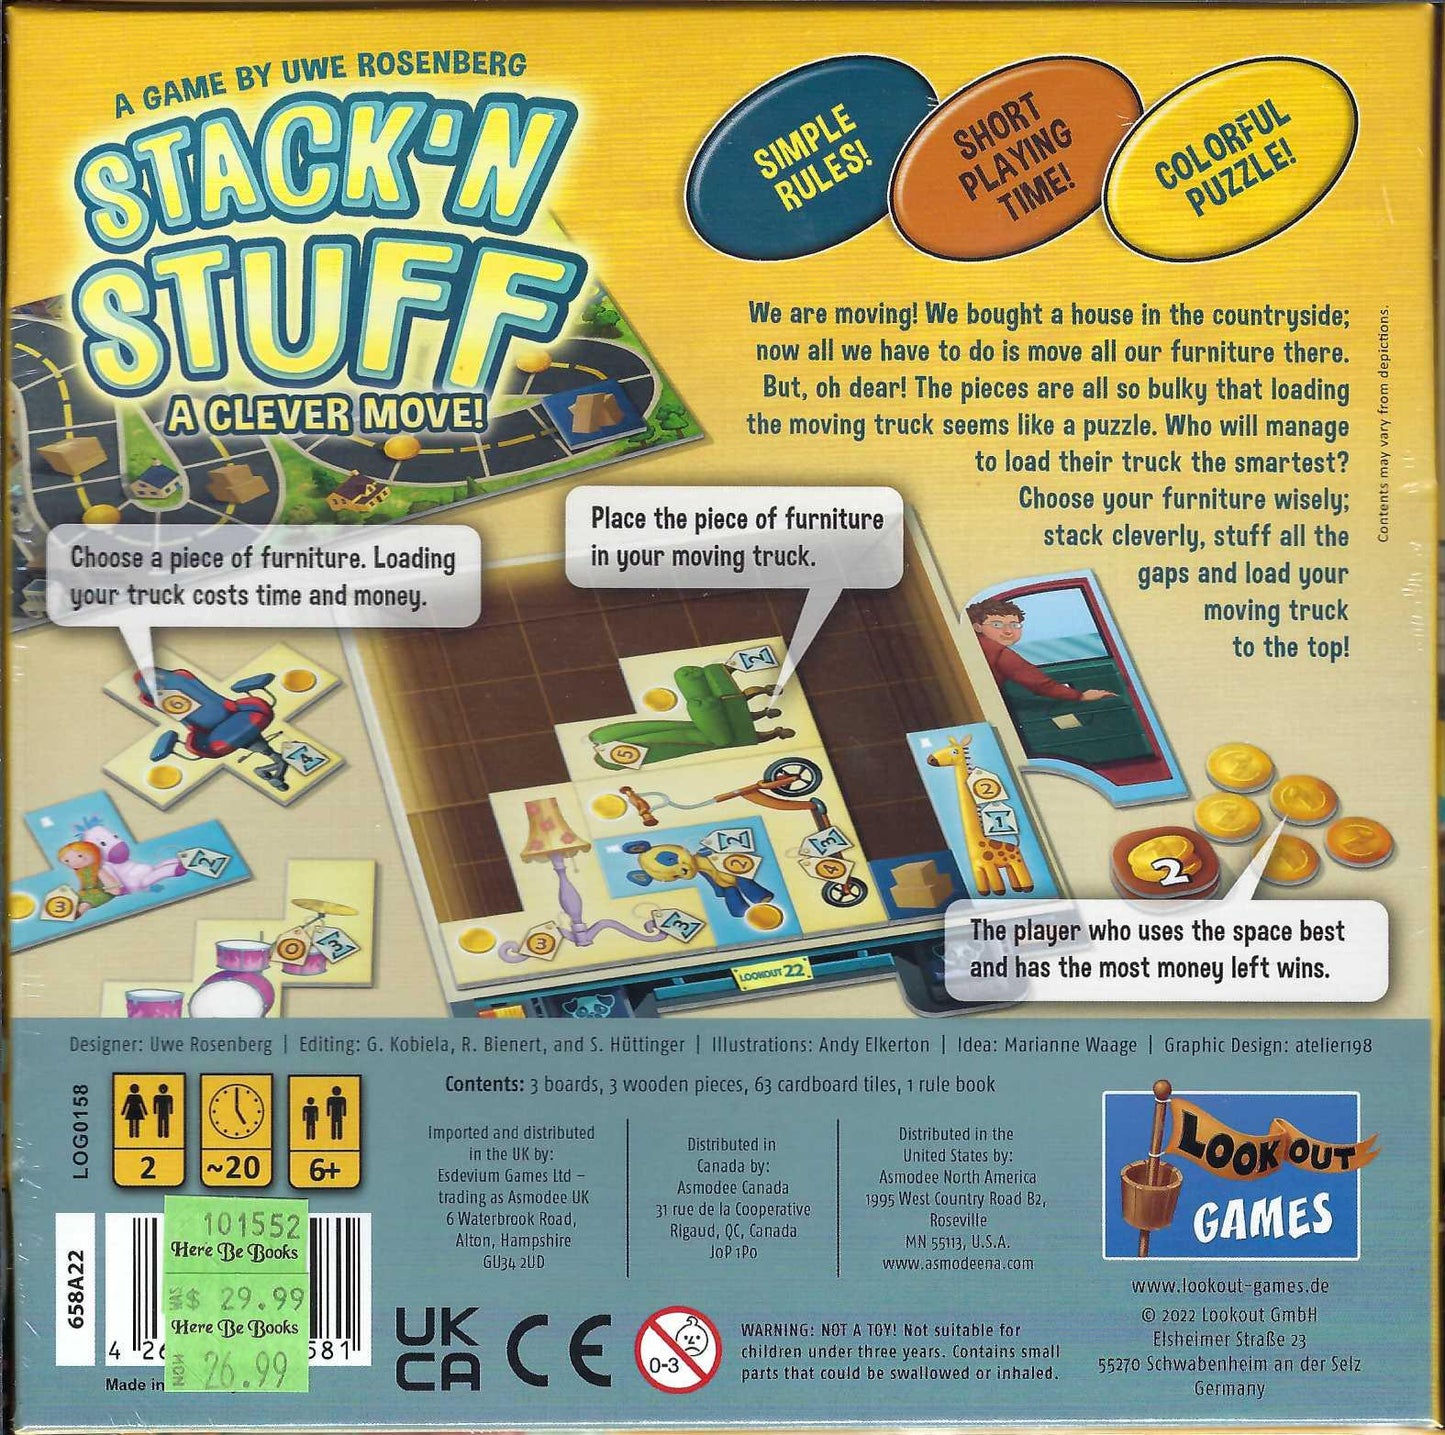 Stack'n Stuff (a Patchwork game)